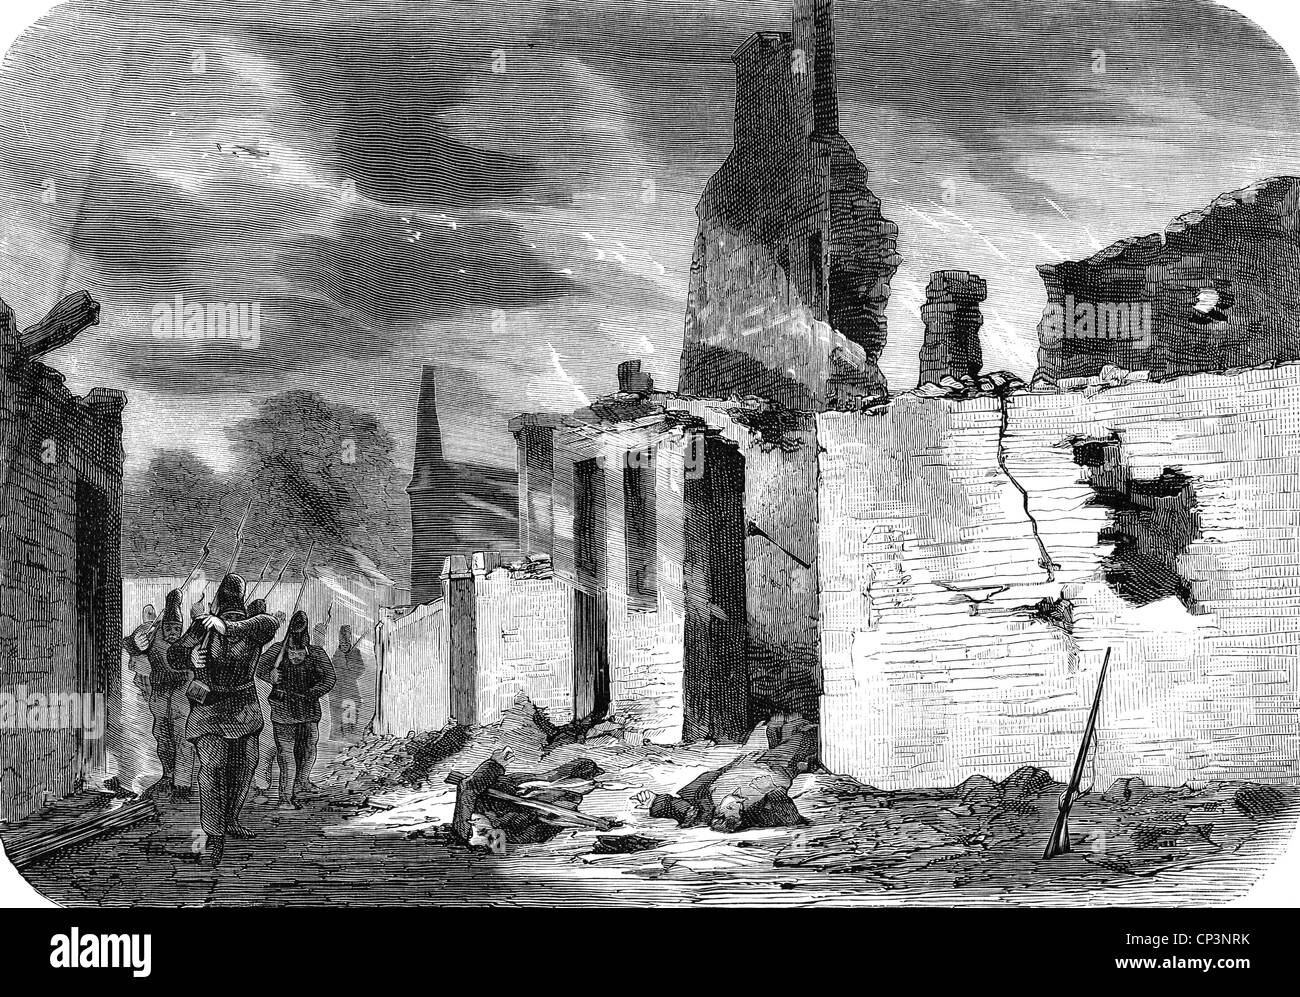 events, Franco-Prussian War 1870 - 1871, Battle of Sedan, 1.9.1870, Bazeilles after being stormed by the Bavarians 1.9.1870, contemporary wood engraving, soldiers, Bavaria, destruction, ruins, fire, smoke, Germany, France, 19th century, Franco - Prussian, historic, historical, people, Additional-Rights-Clearences-Not Available Stock Photo